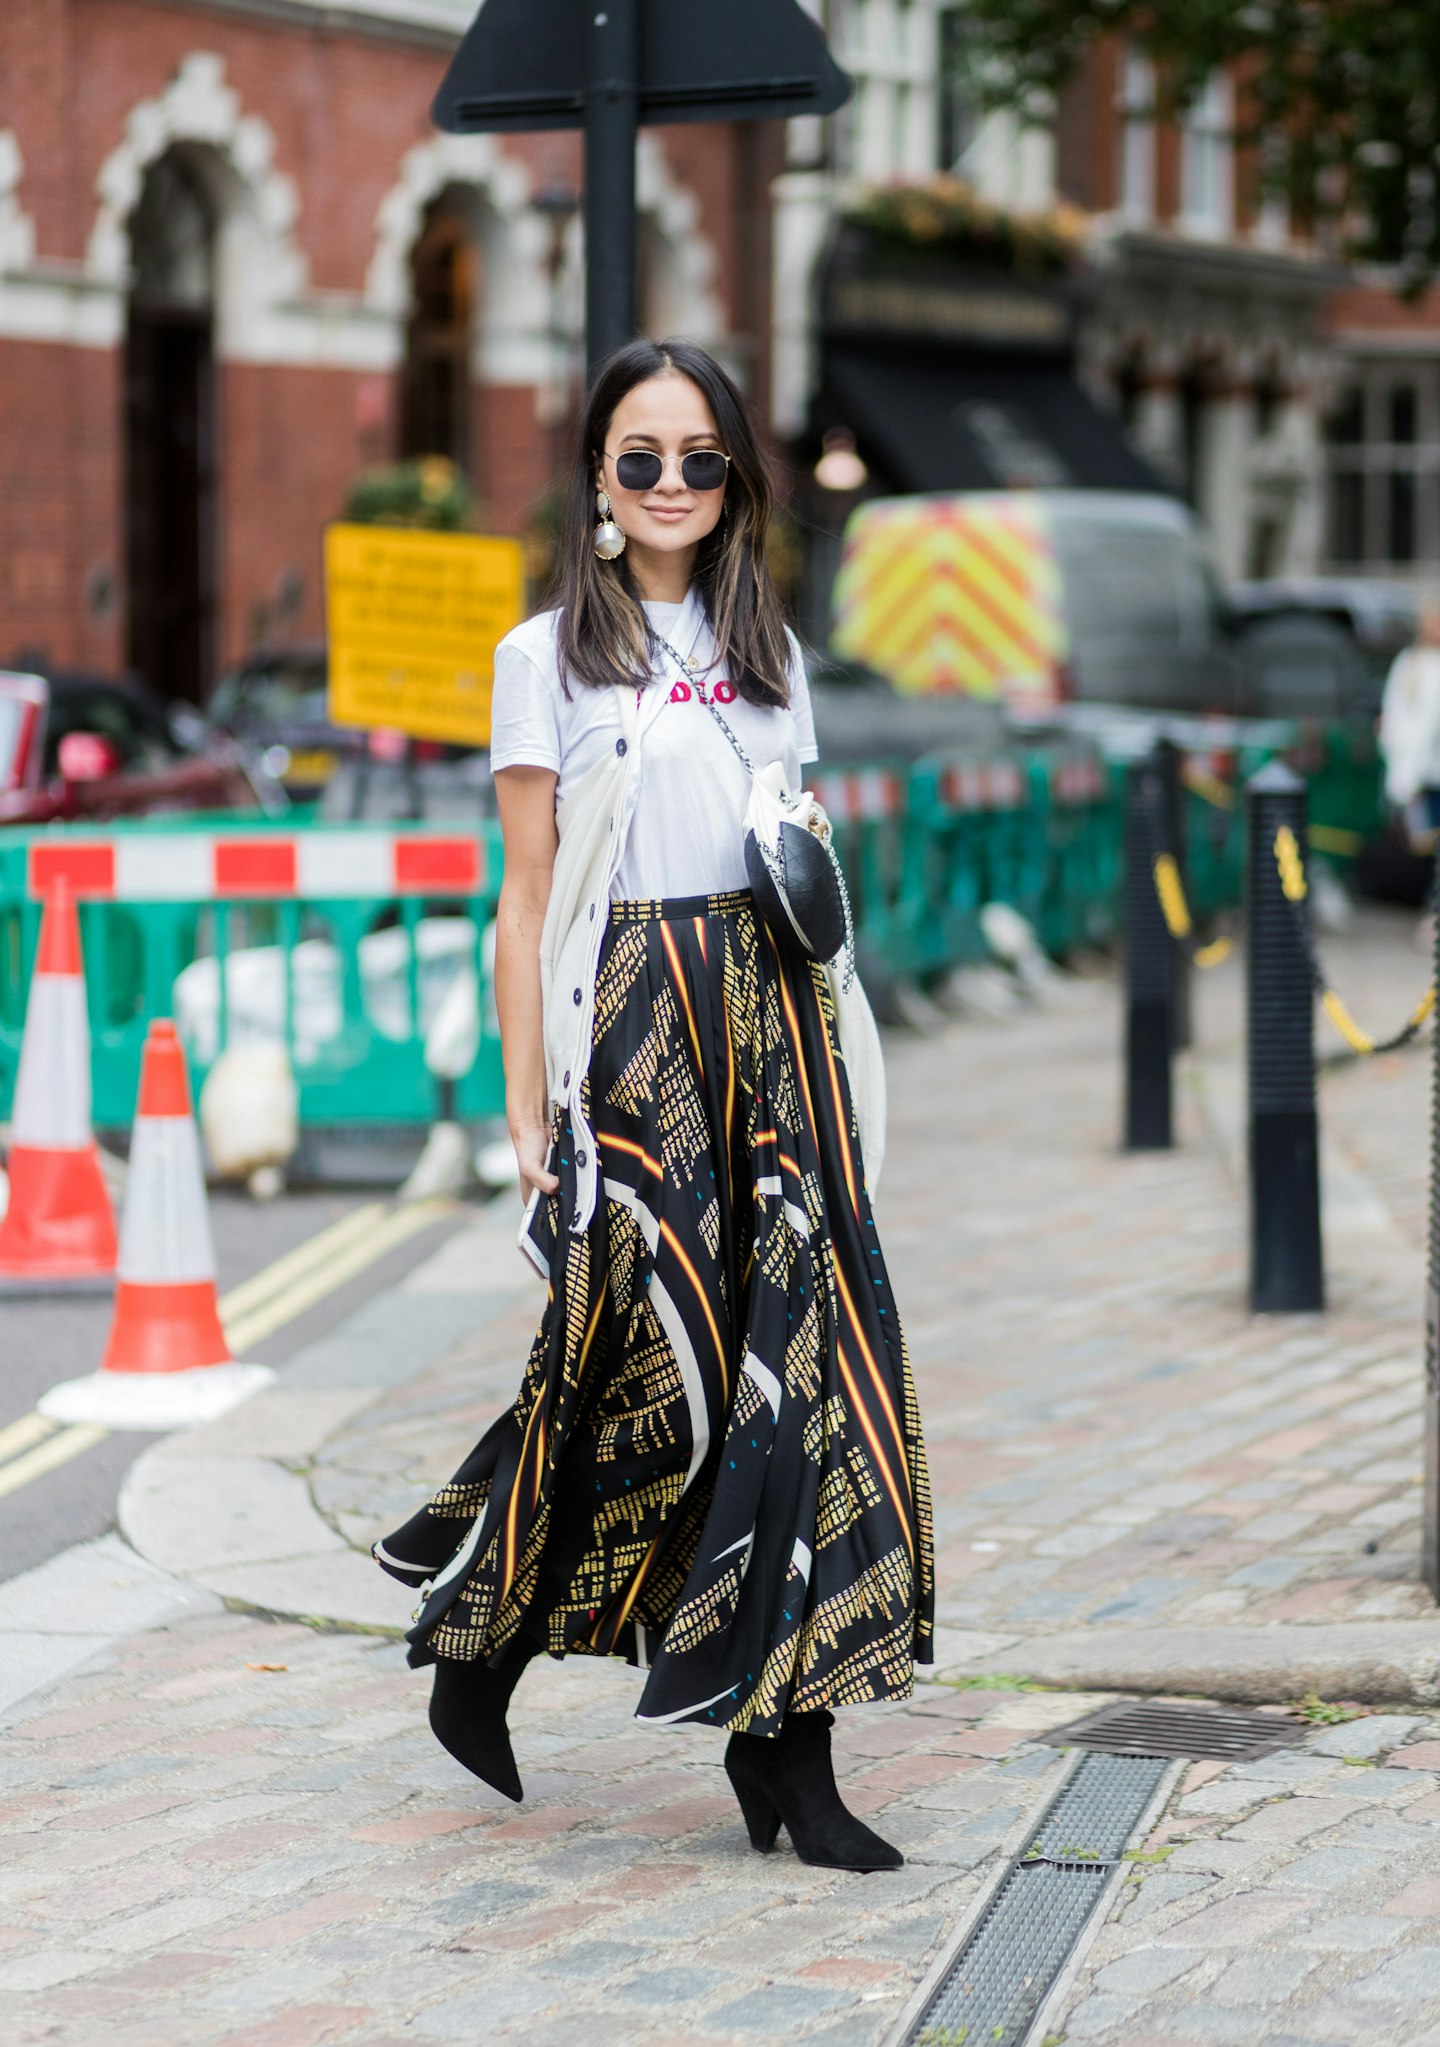 The Best Street Style Looks From London Fashion Week AW17 - Grazia